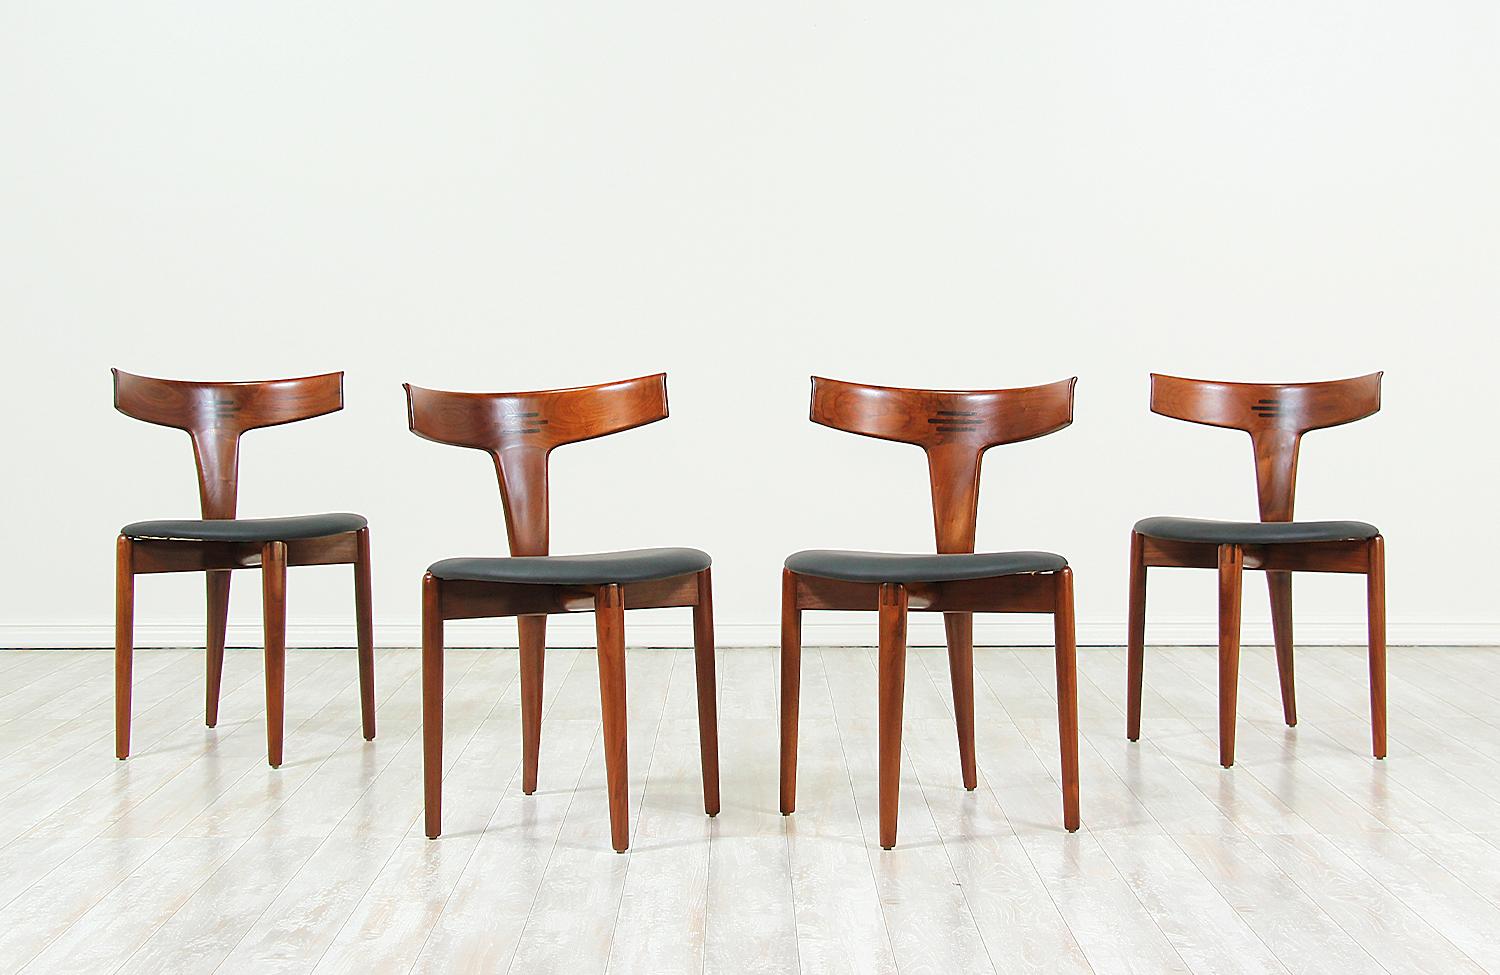 Set of four modern Danish dining chairs designed by Erik Andersen and Palle Pedersen for Randers Møbelfabrik in Denmark in 1963. This spectacular set features a solid walnut wood frame with tapered legs set in a diamond-shape and a curved backrest,